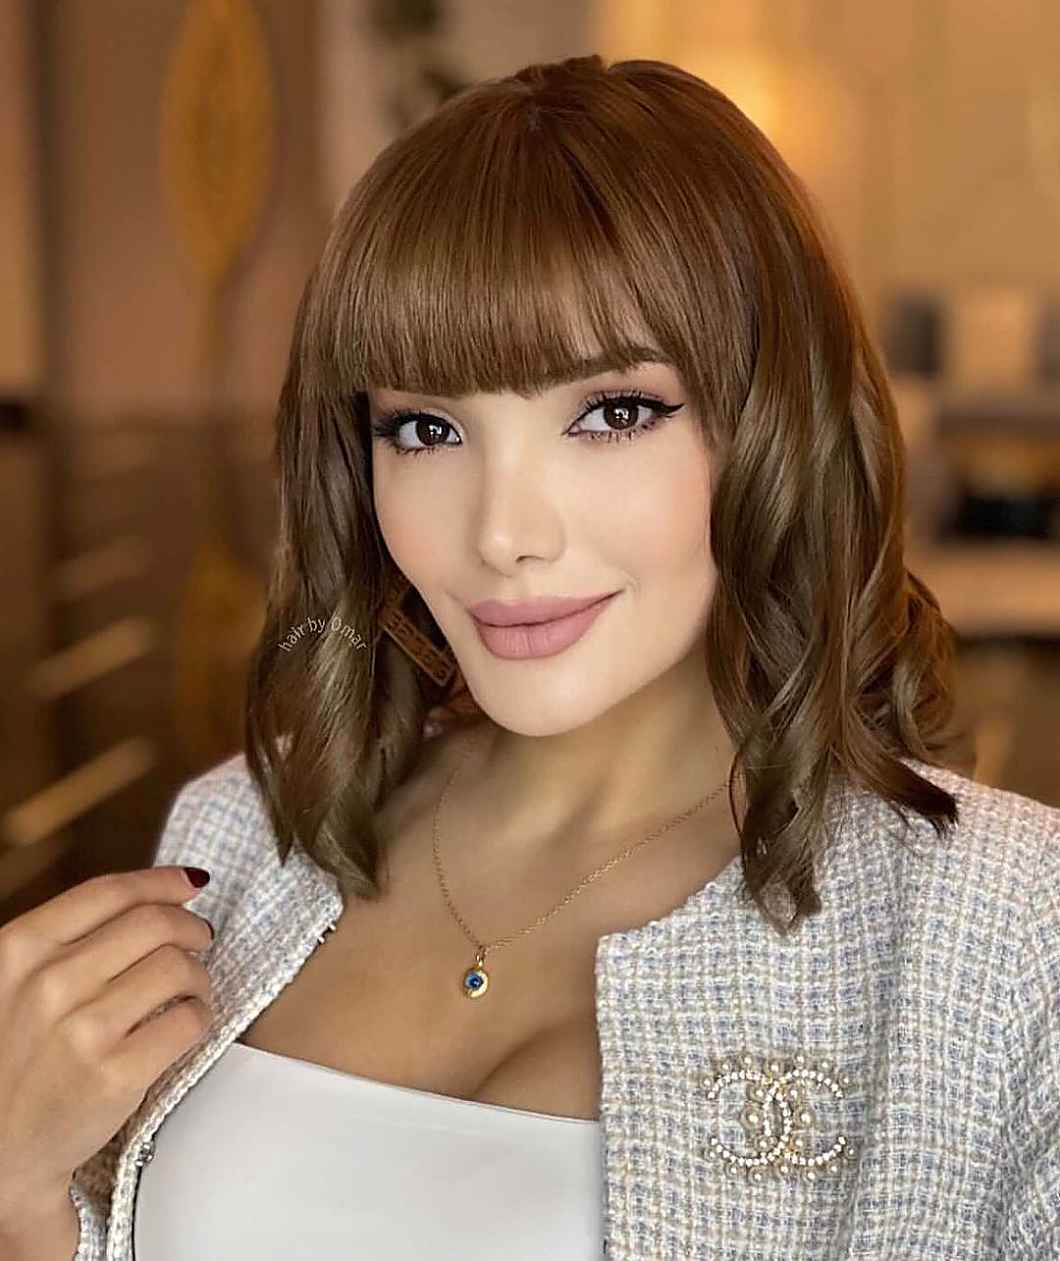 super short cropped cut with fringe bangs